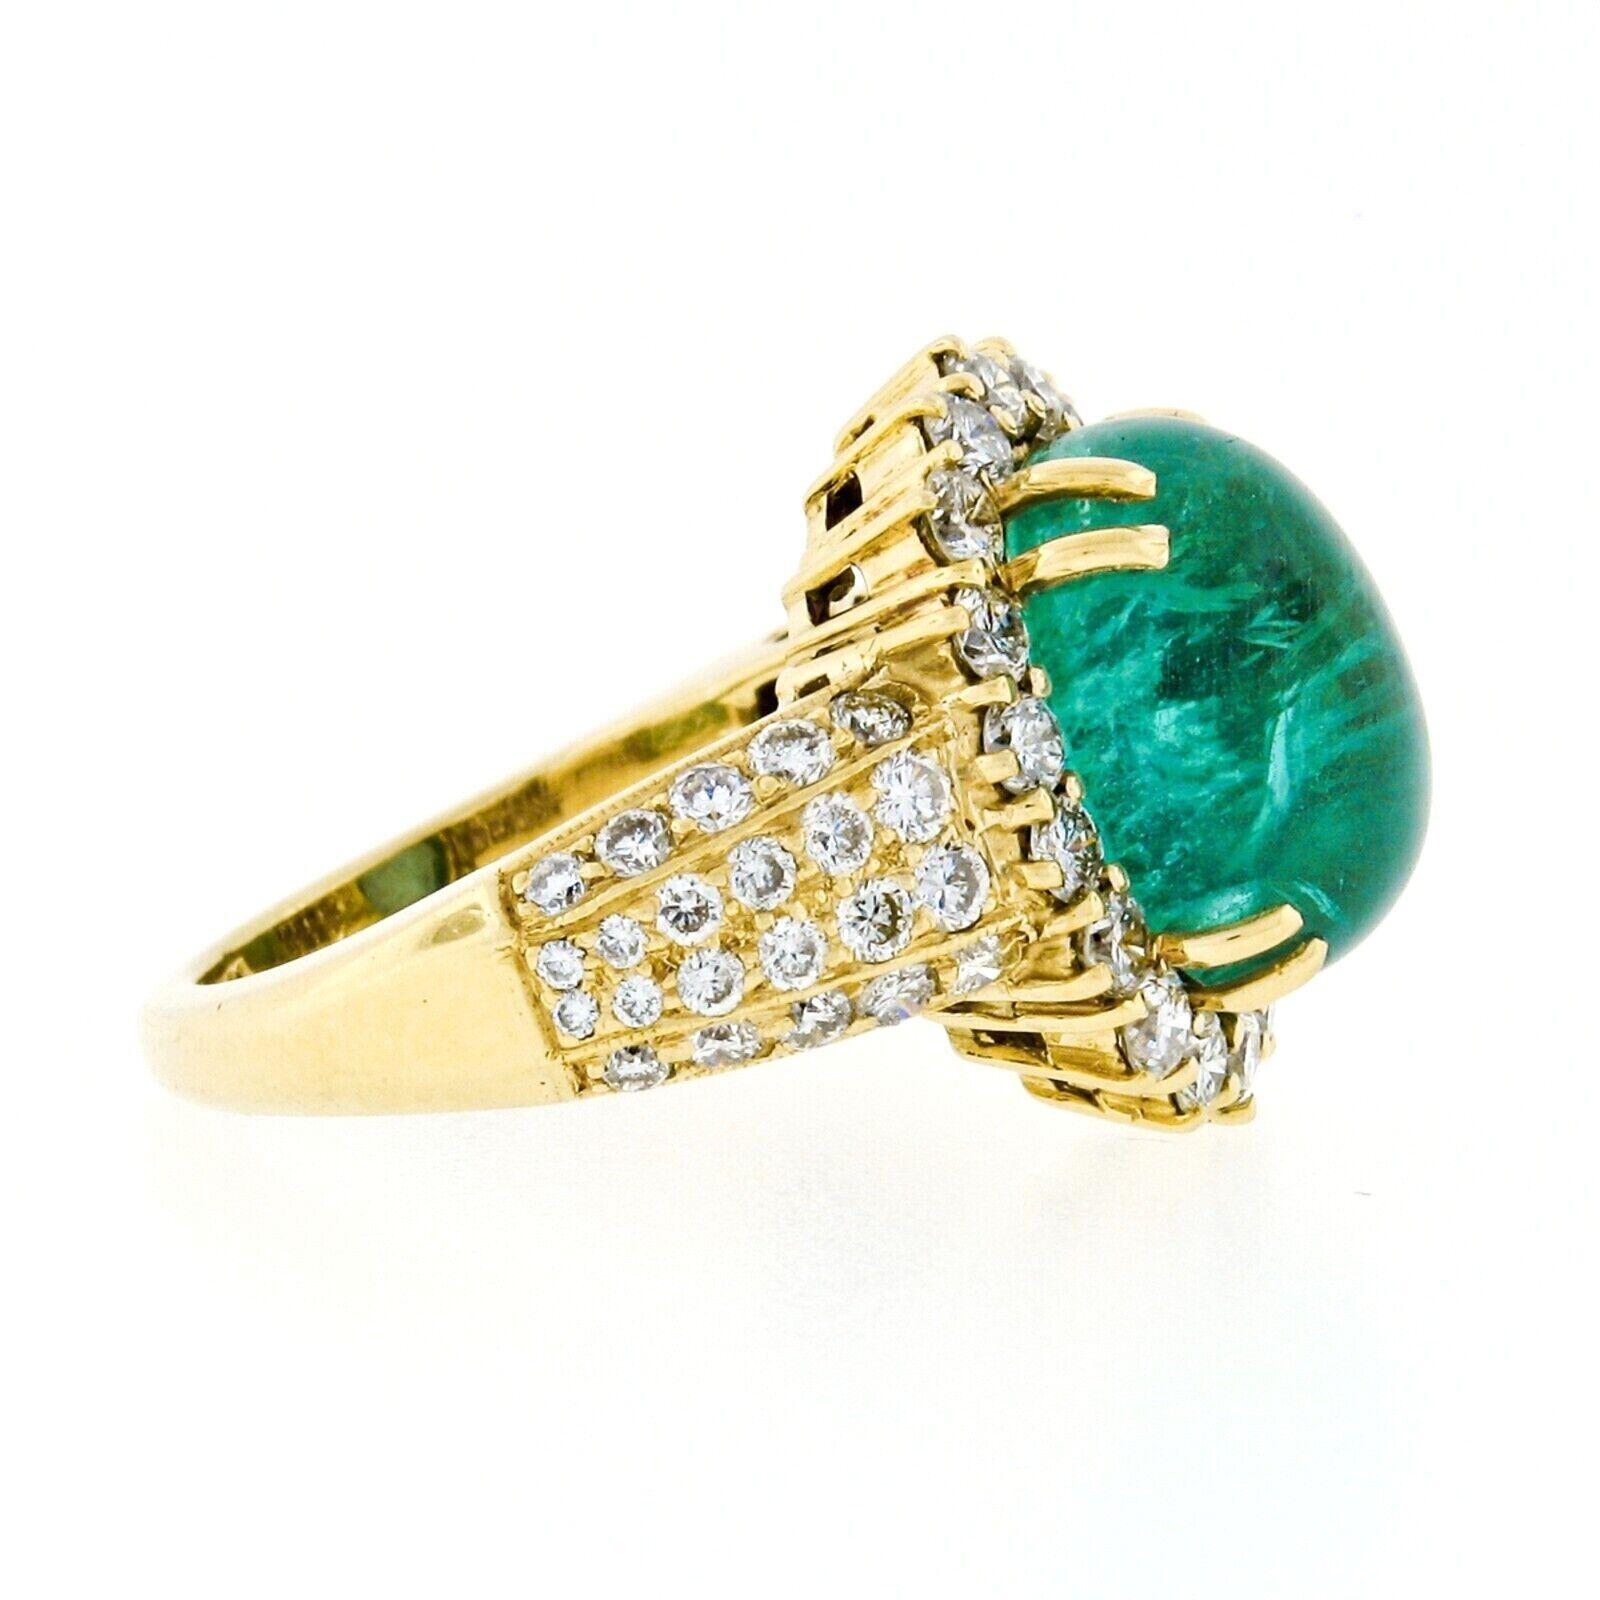 Vintage 18k Gold 8.58ct AGL Oval Cabochon Emerald and Pave Diamond Cocktail Ring In Good Condition For Sale In Montclair, NJ